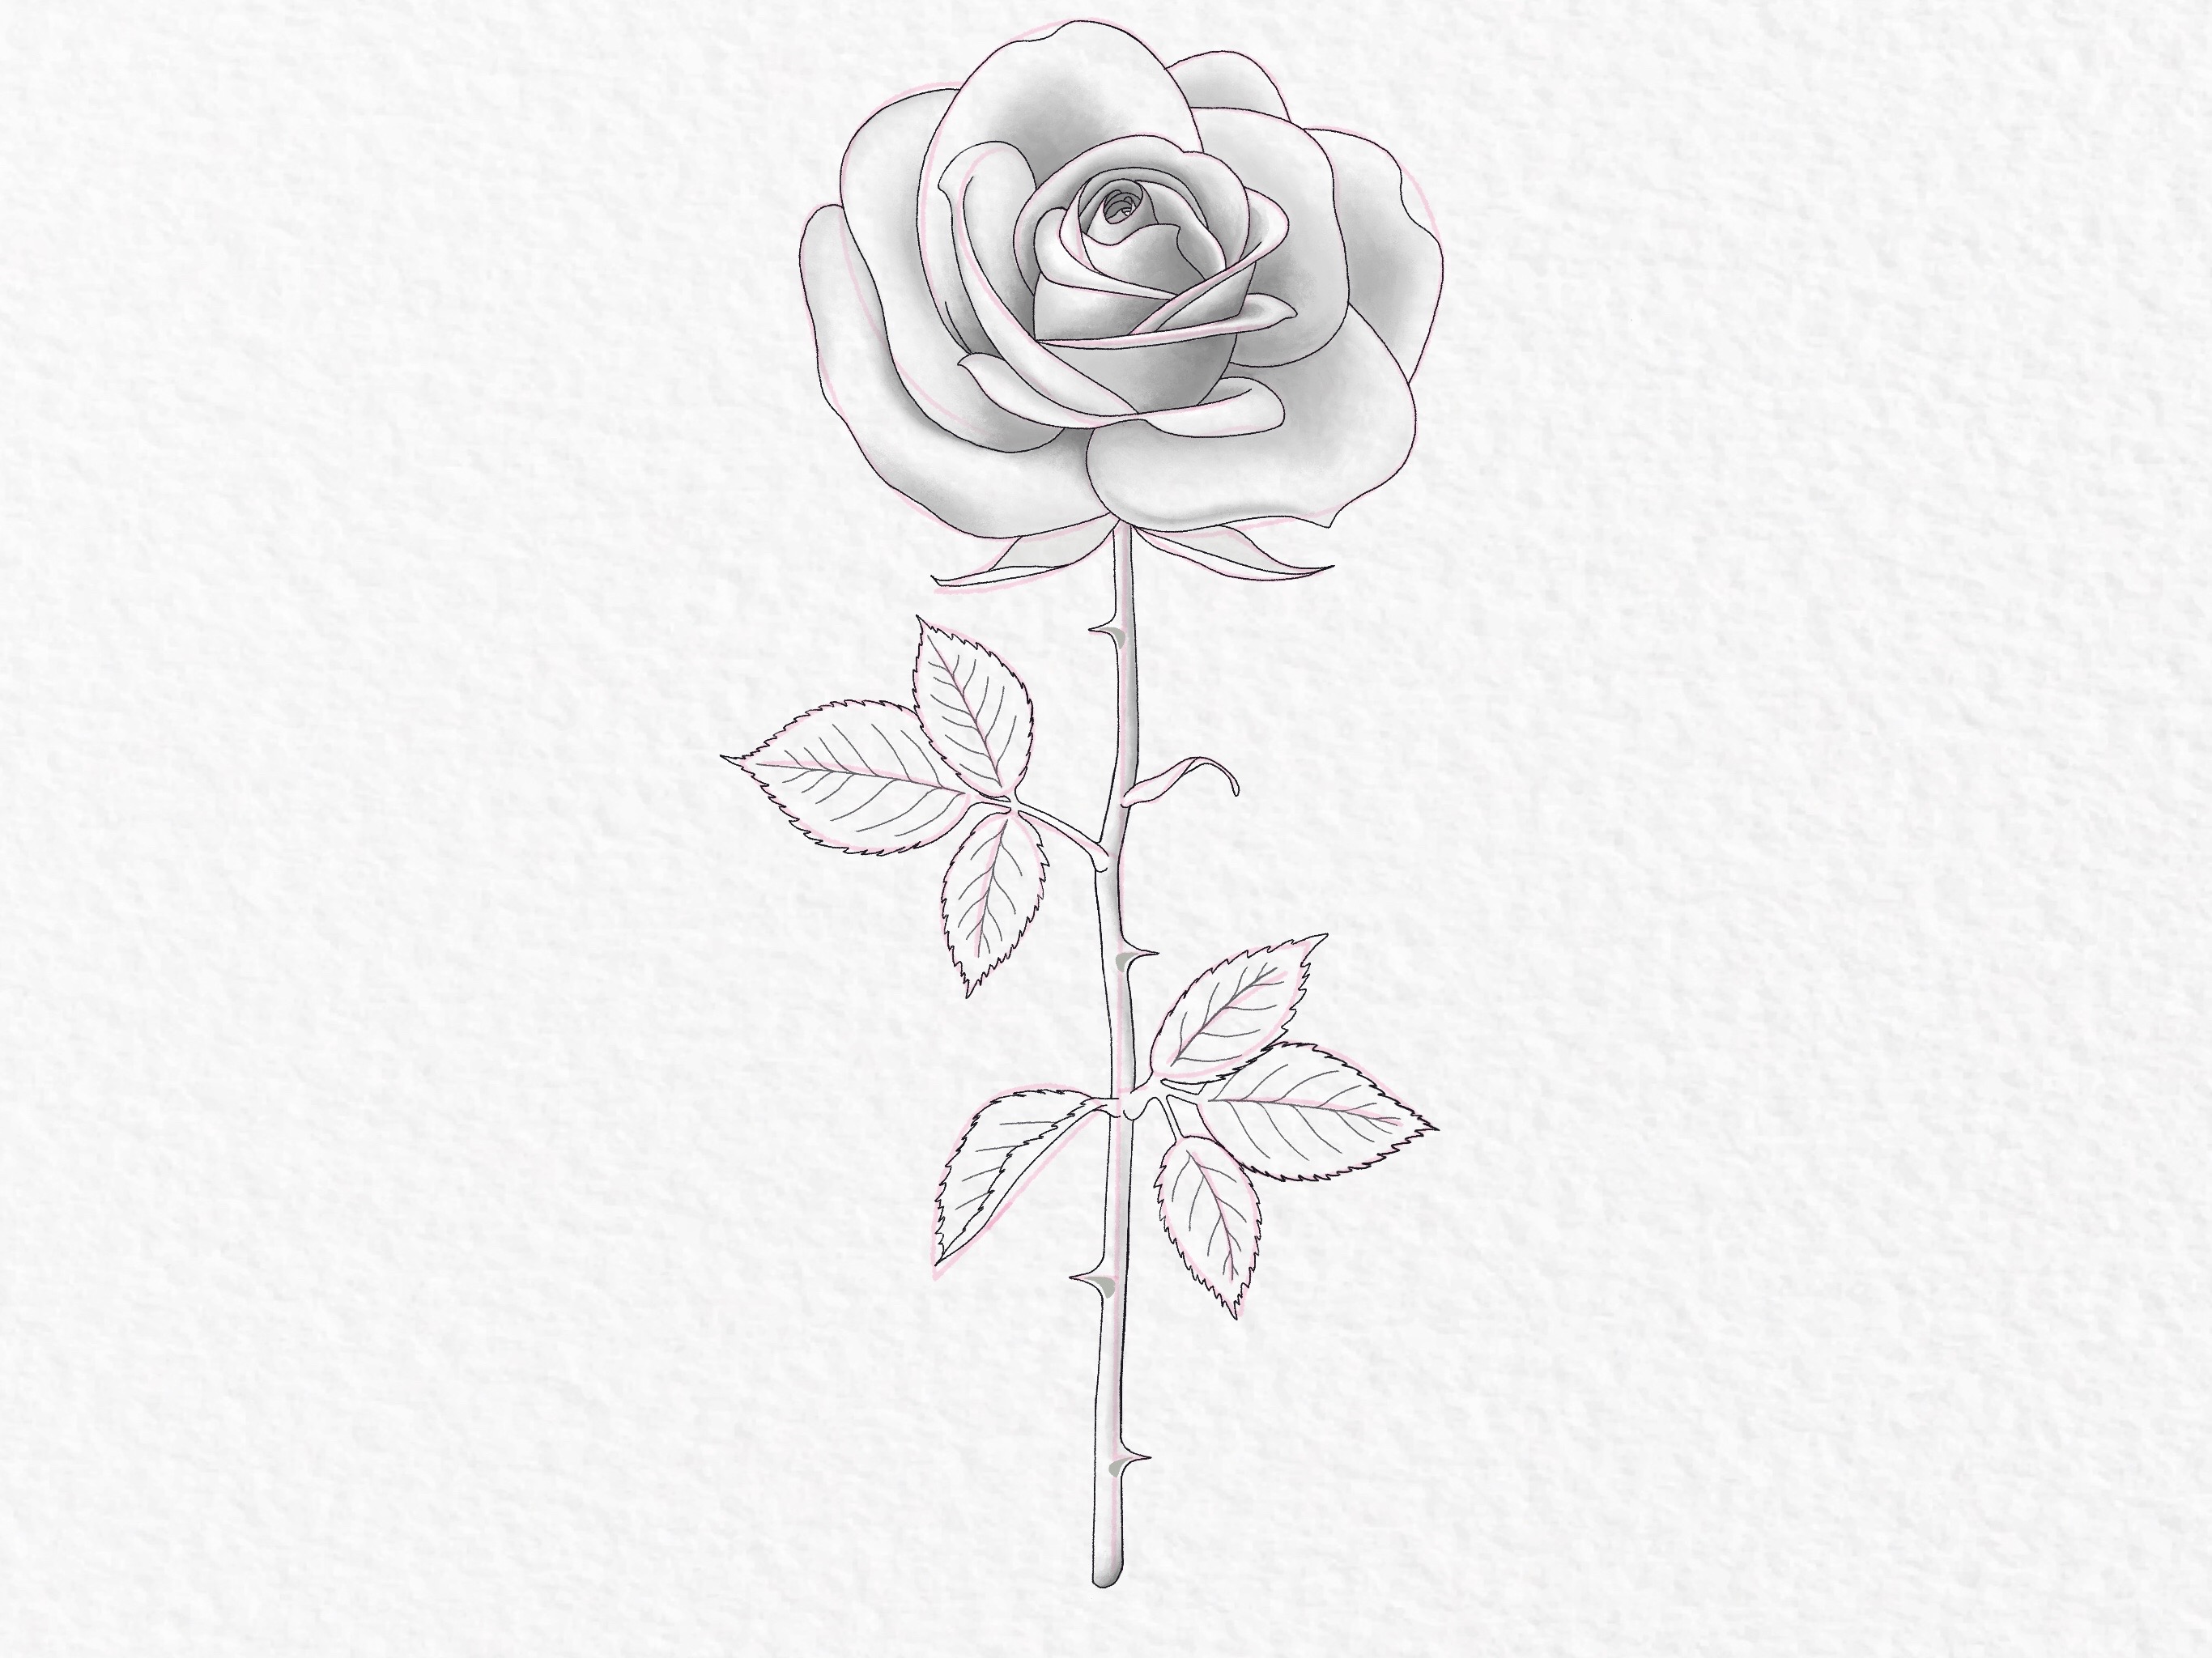 How to draw a rose, step by step drawing tutorial - step 45